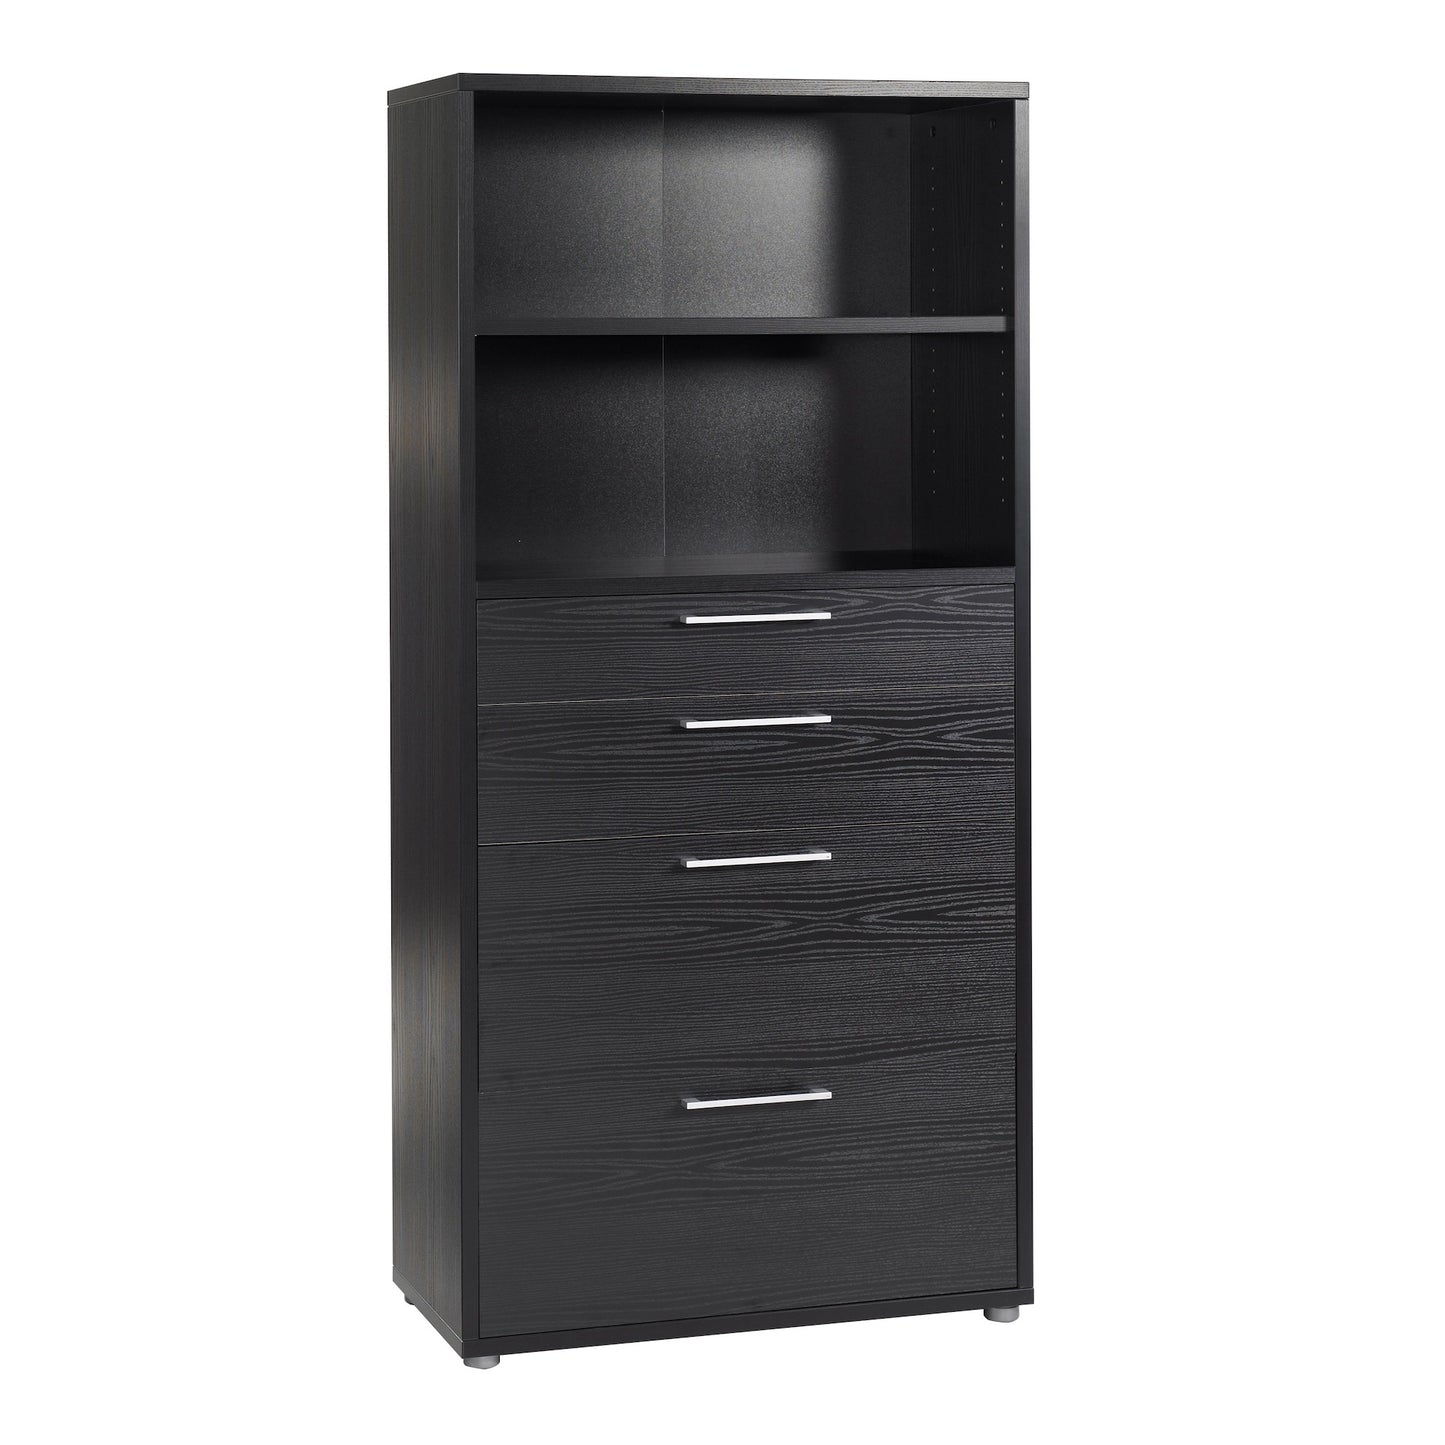 Furniture To Go Prima Bookcase 1 Shelf with 2 Drawers + 2 File Drawers in Black Woodgrain